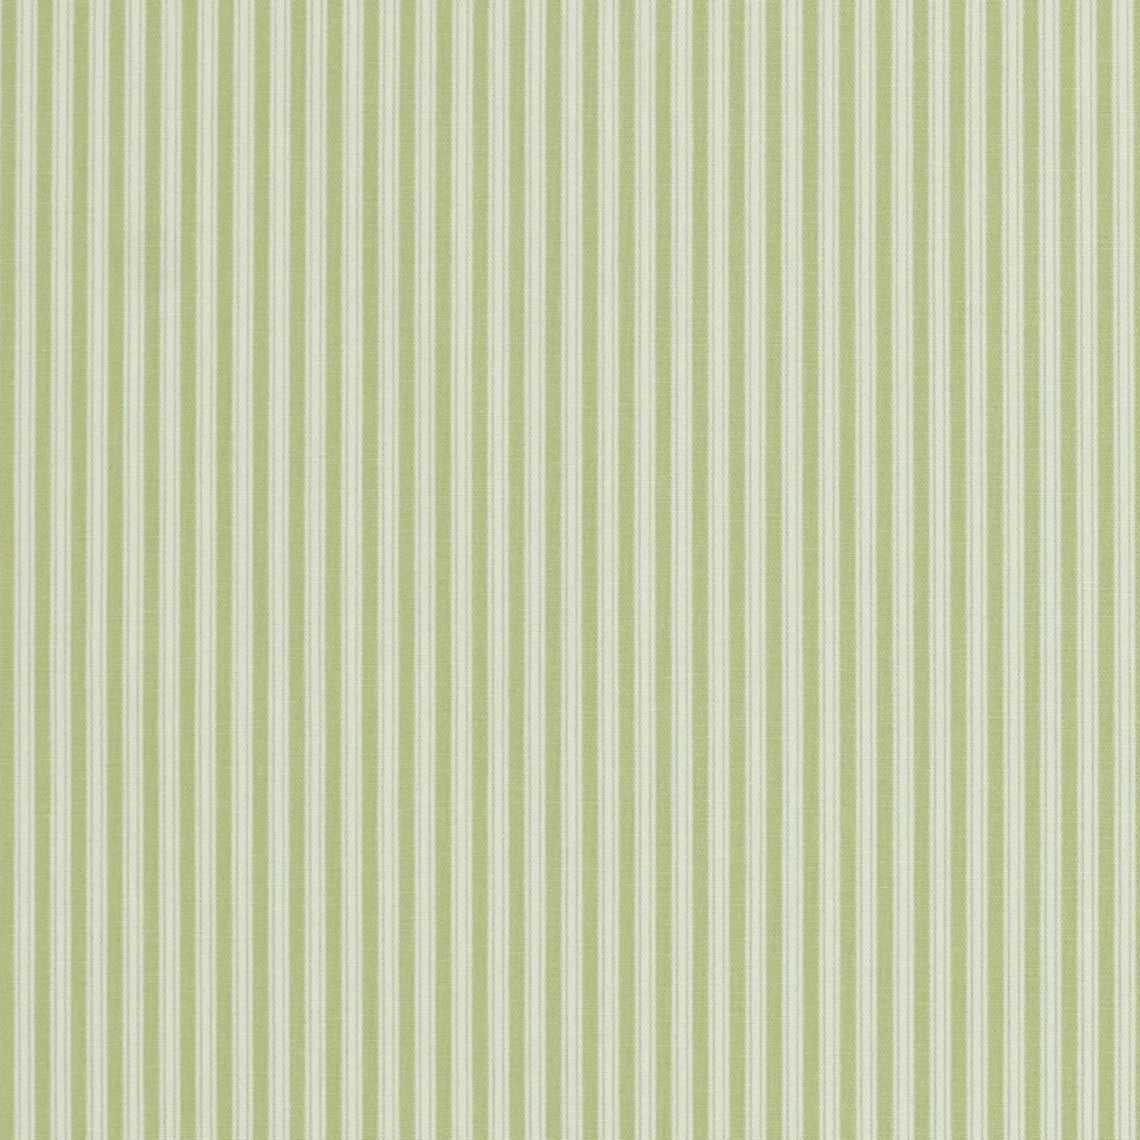 tailored tier cafe curtain panels pair in polo fern pale green stripe